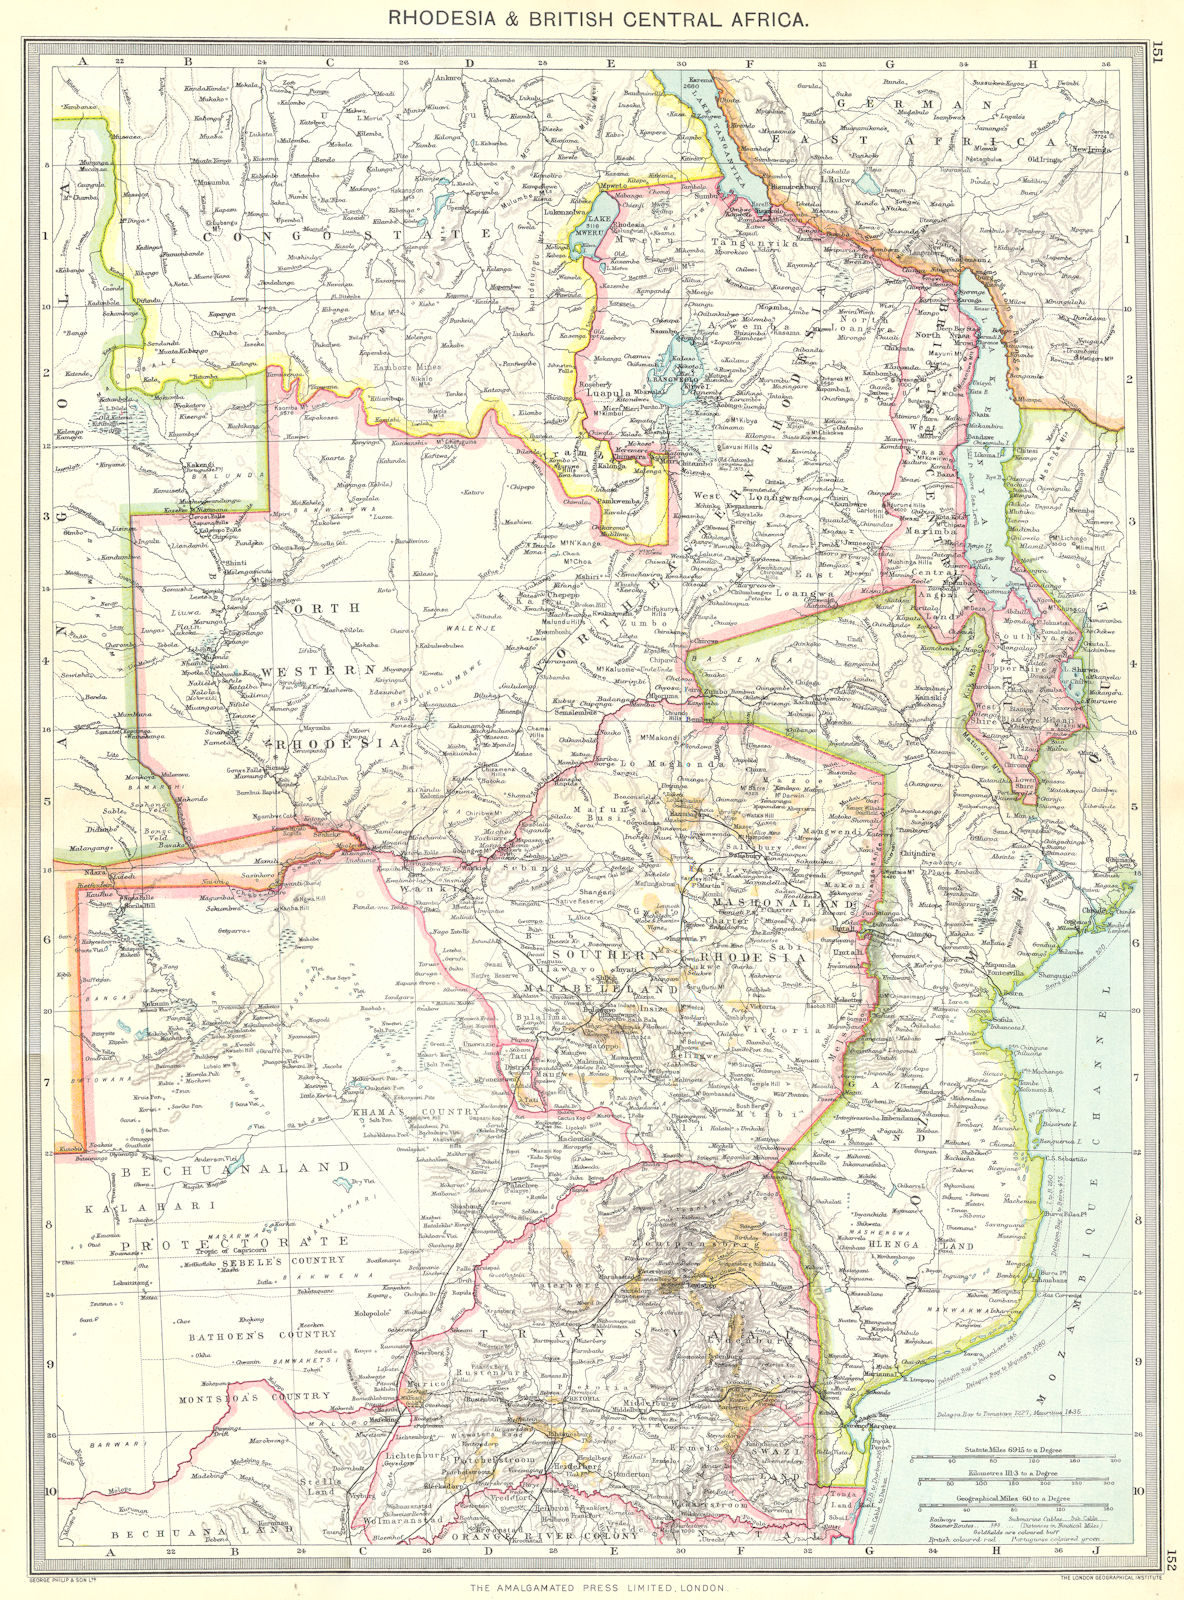 ZIMBABWE. Rhodesia and British Central Africa 1907 old antique map plan chart